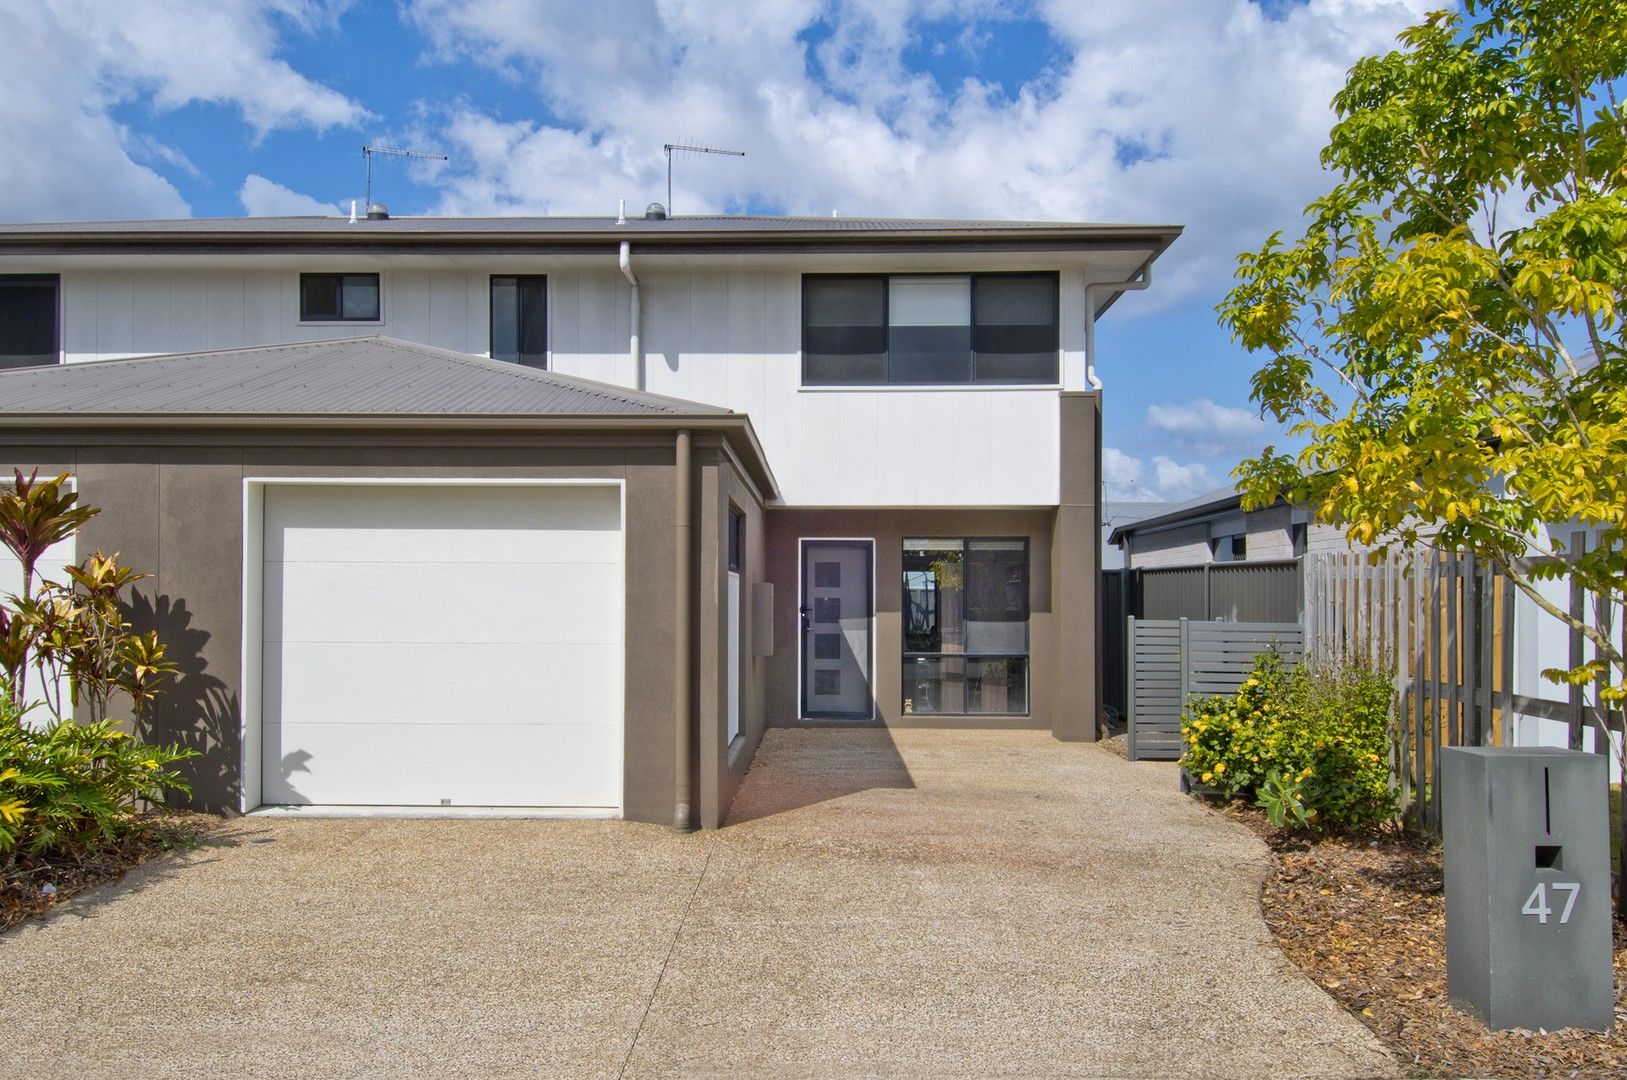 3 bedrooms Townhouse in 47/26-32 Radke Road BETHANIA QLD, 4205